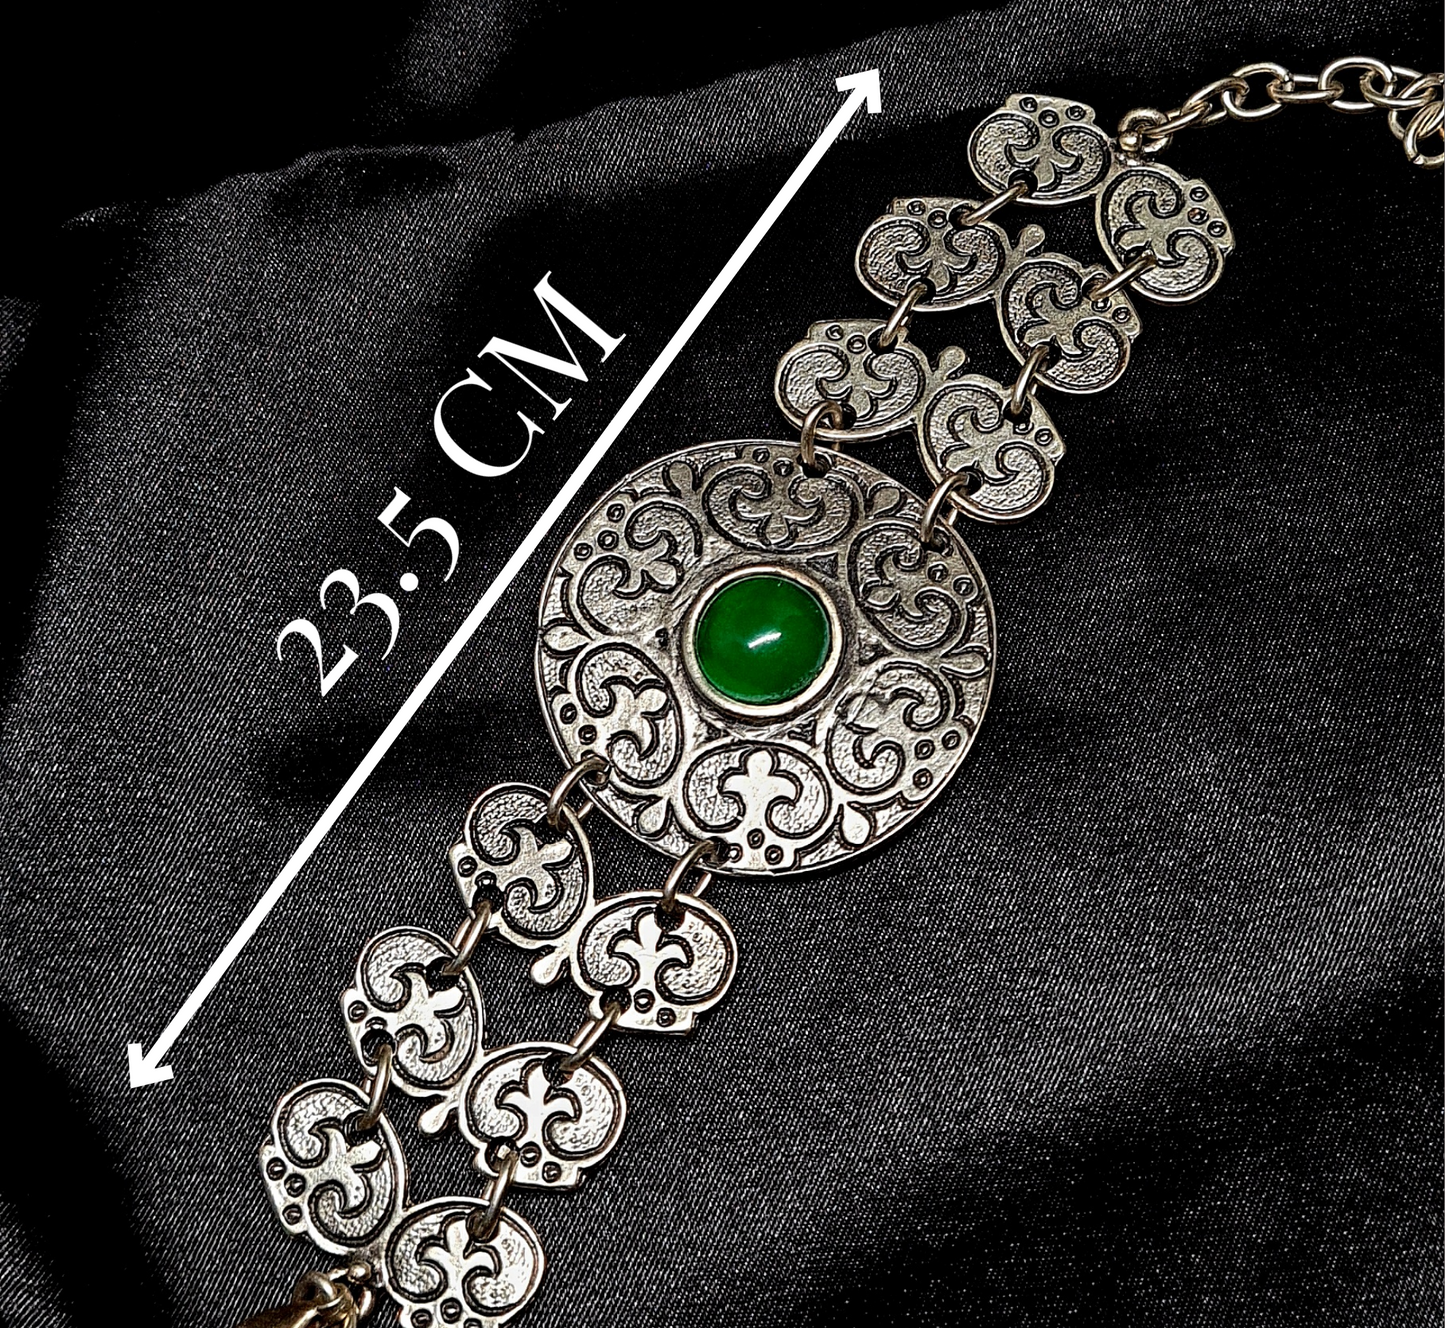 A silver bracelet with a green stone in the center. The bracelet is made of silver and has a delicate design. The green stone is oval-shaped and has a smooth finish with measurements 